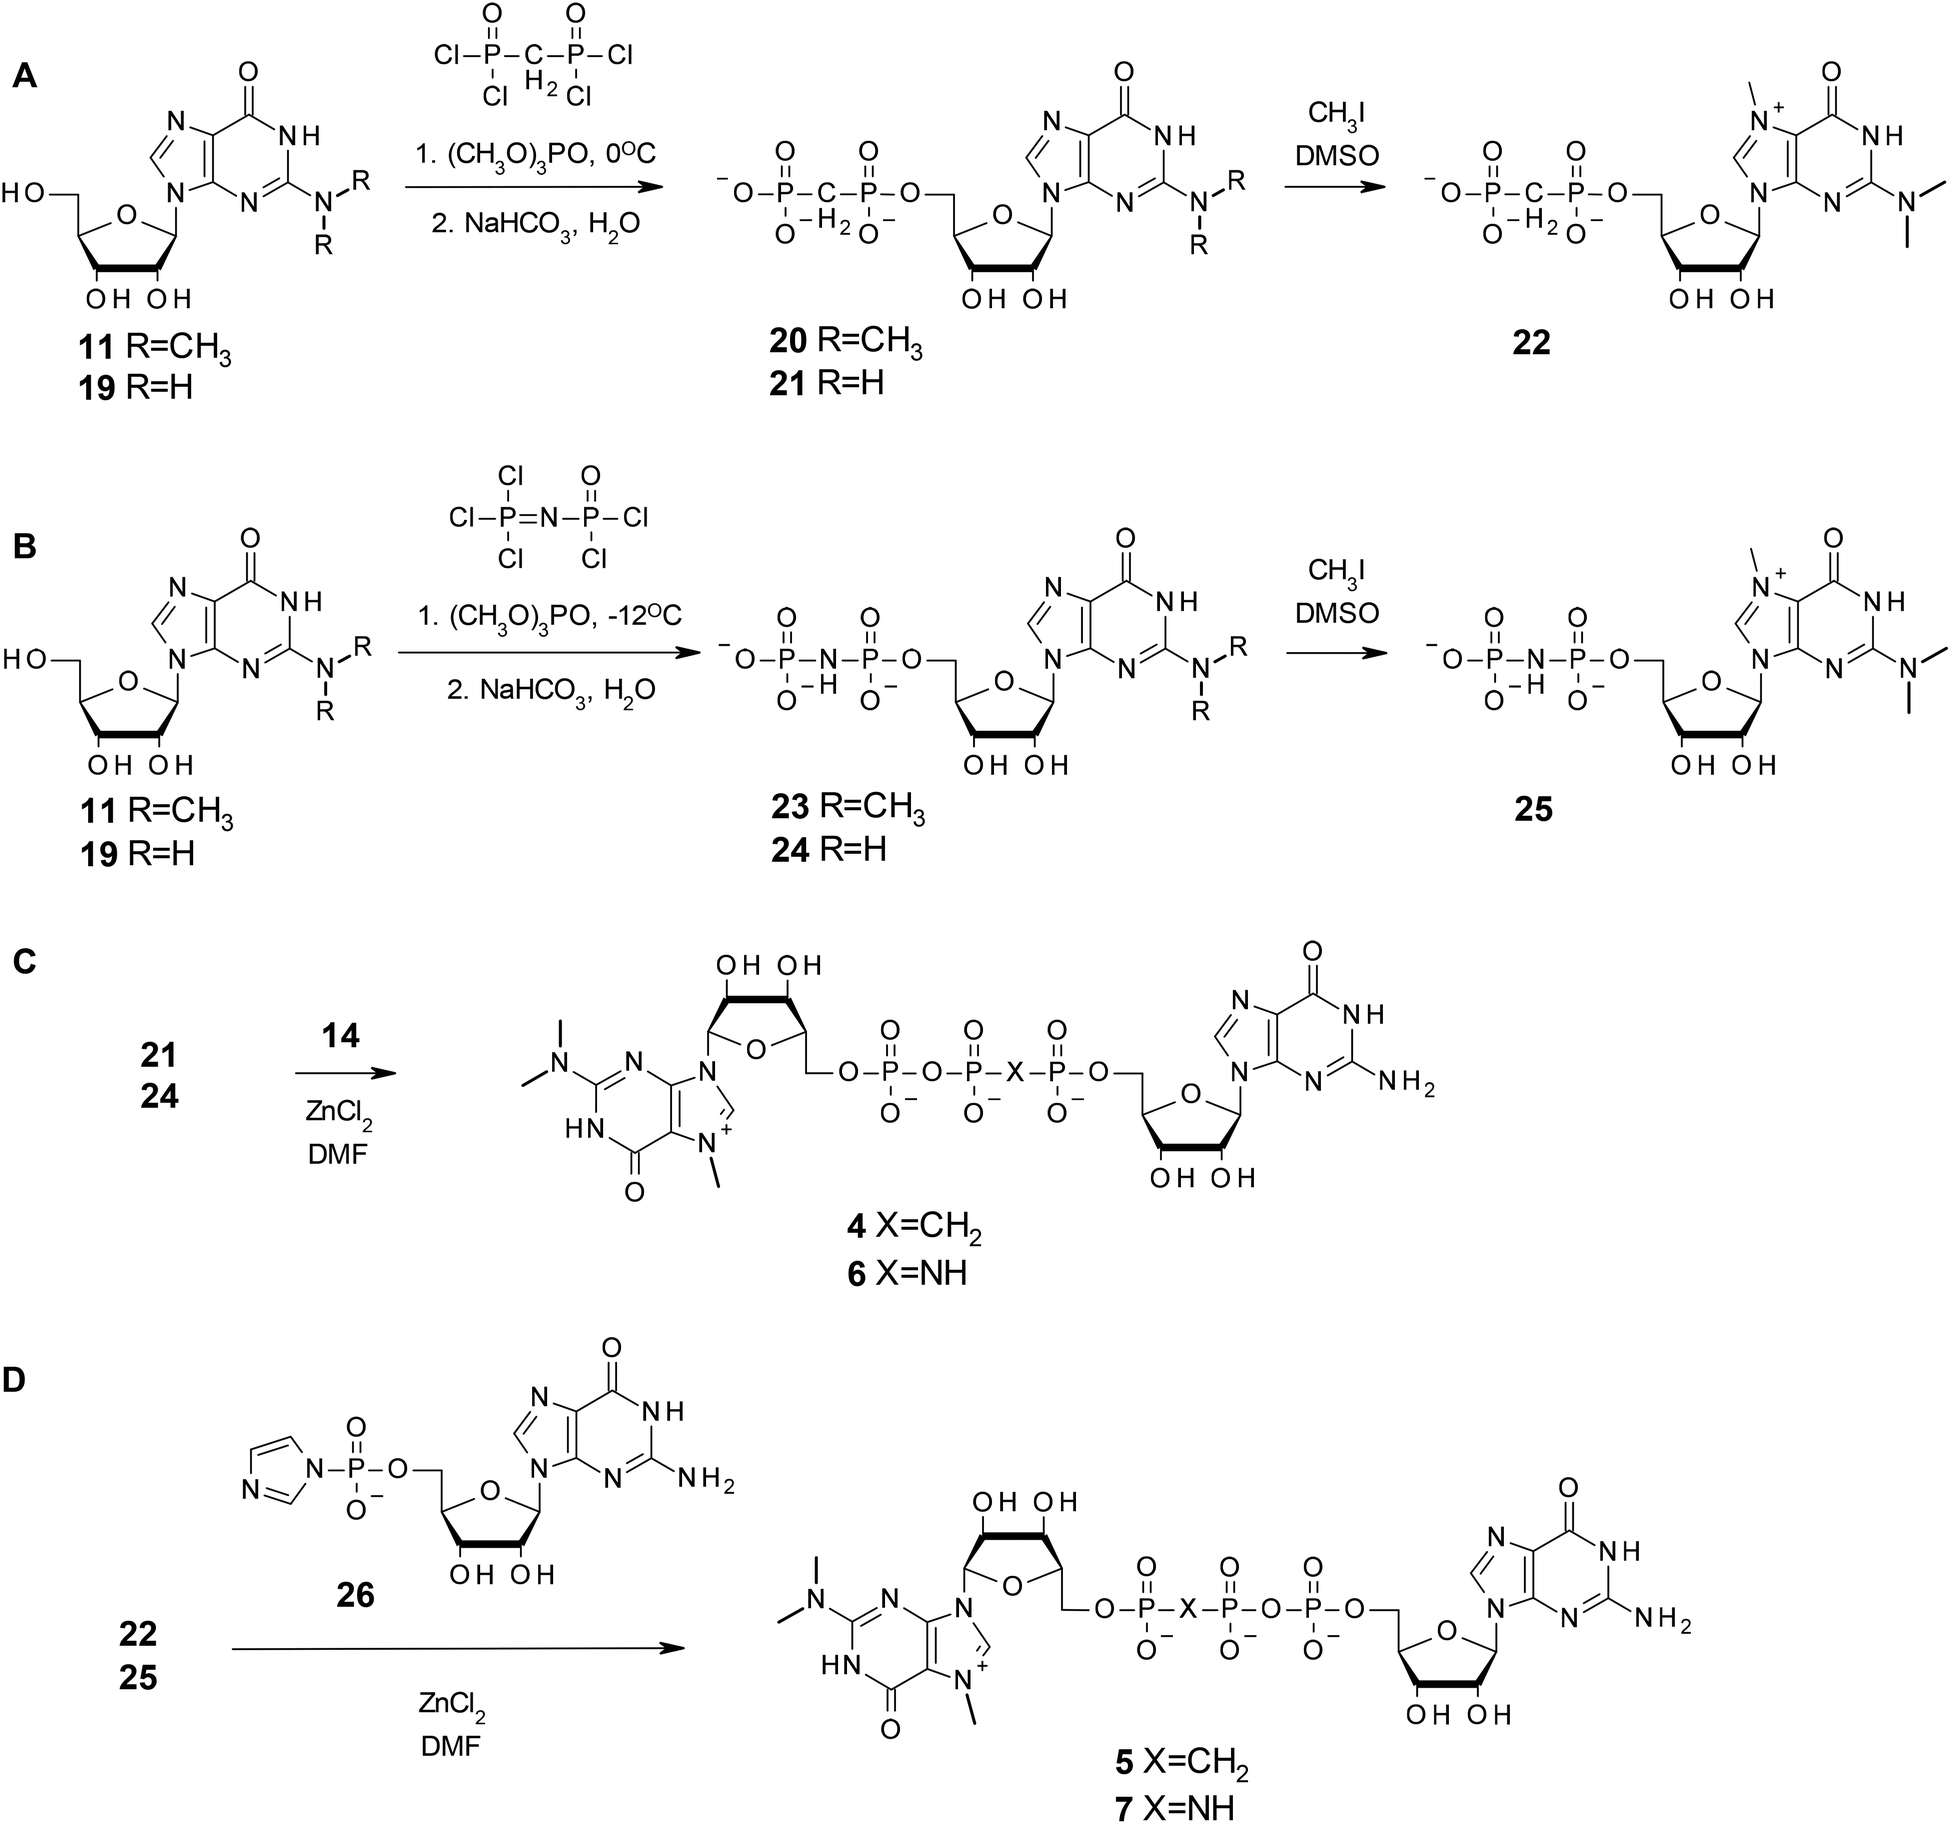 Towards Novel Efficient And Stable Nuclear Import Signals Synthesis And Properties Of Trimethylguanosine Cap Analogs Modified Within The 5 5 Tripho Organic Biomolecular Chemistry Rsc Publishing Doi 10 1039 C4obg